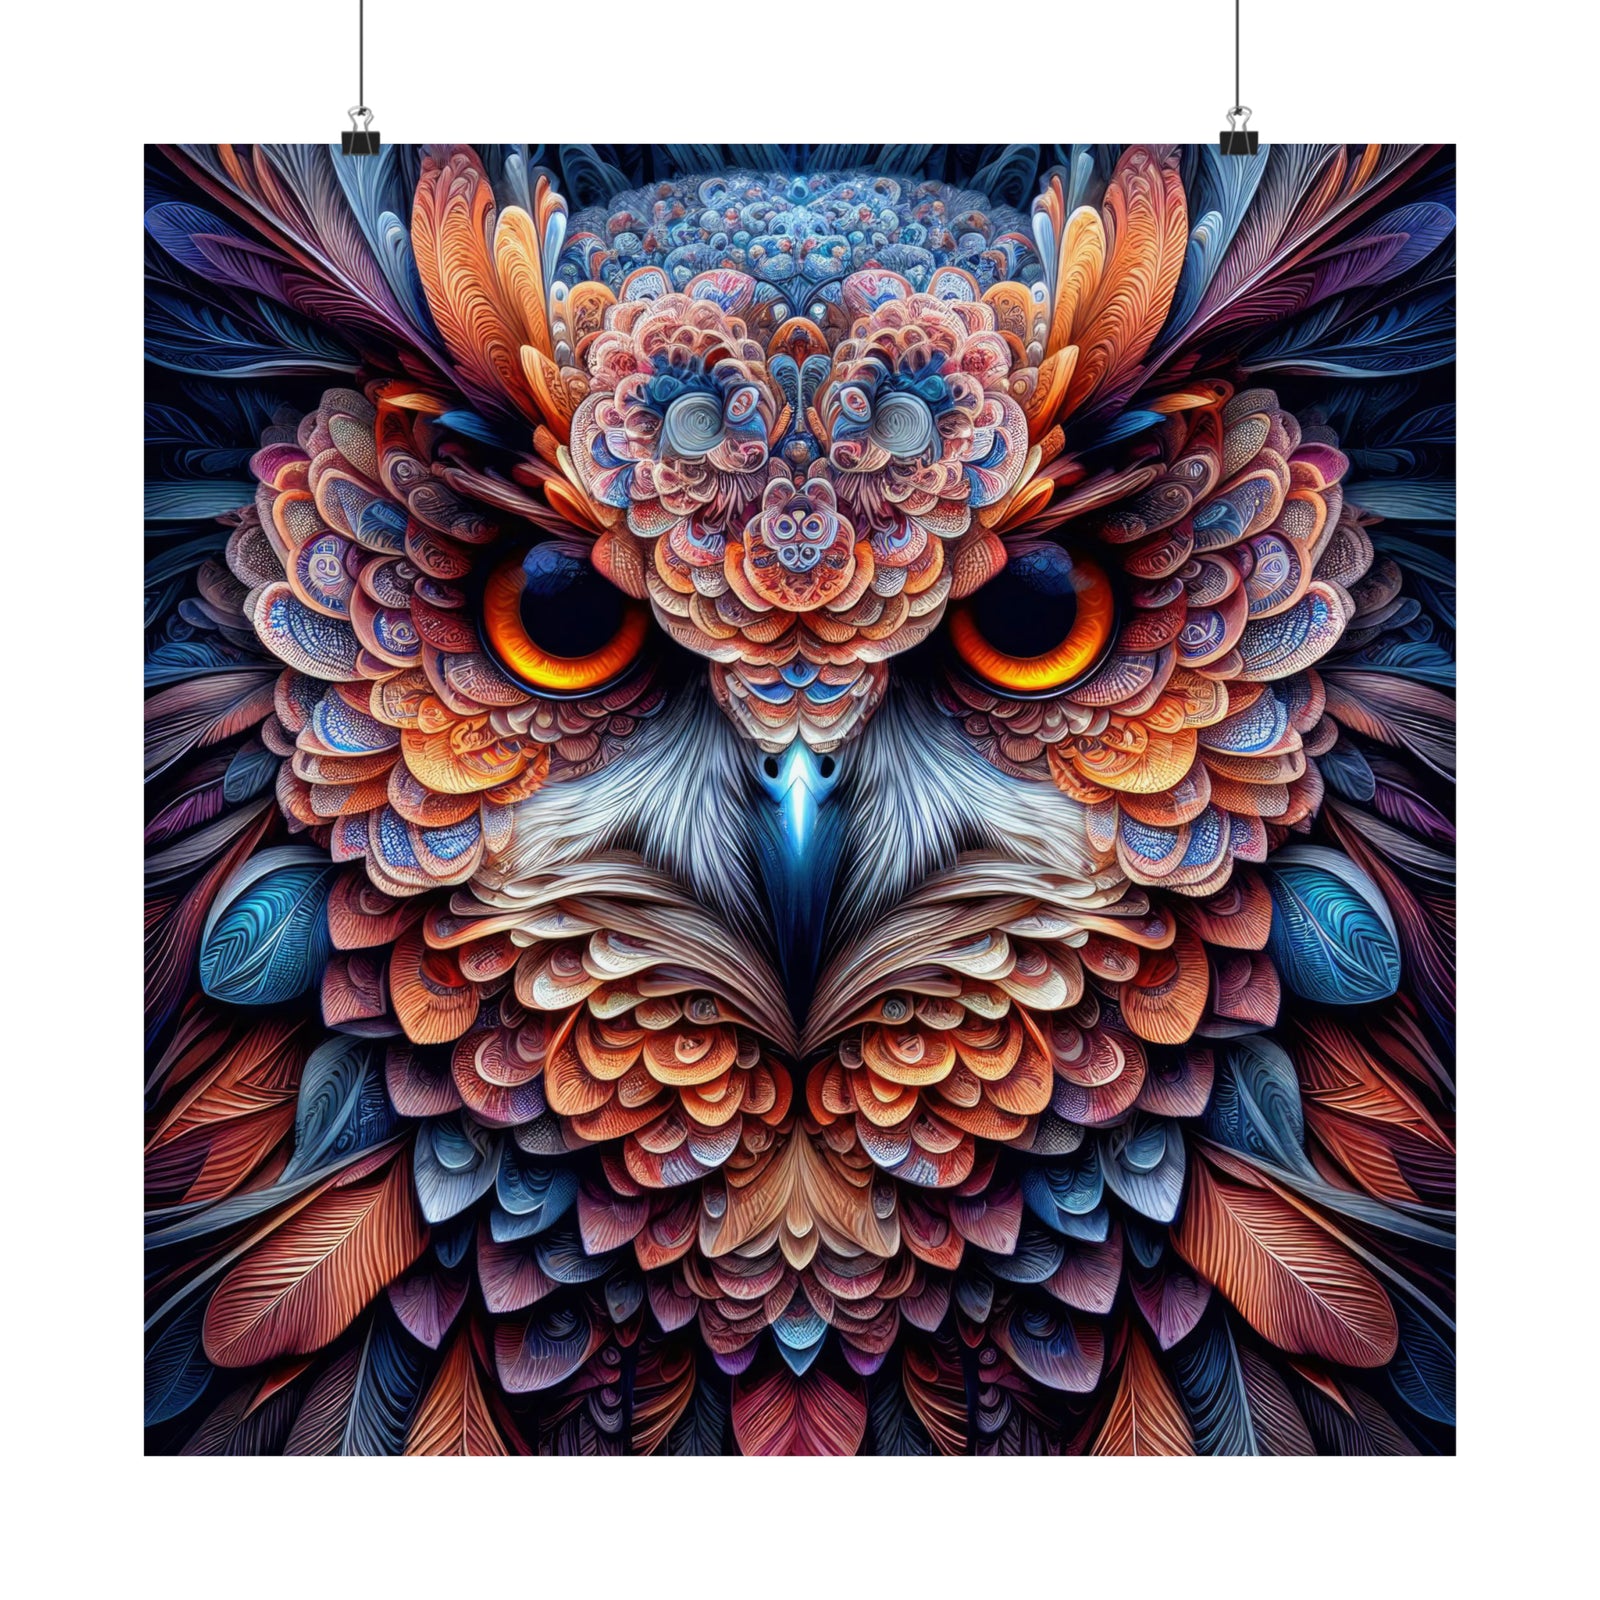 The Fractal Gaze of the Mystic Owl Poster